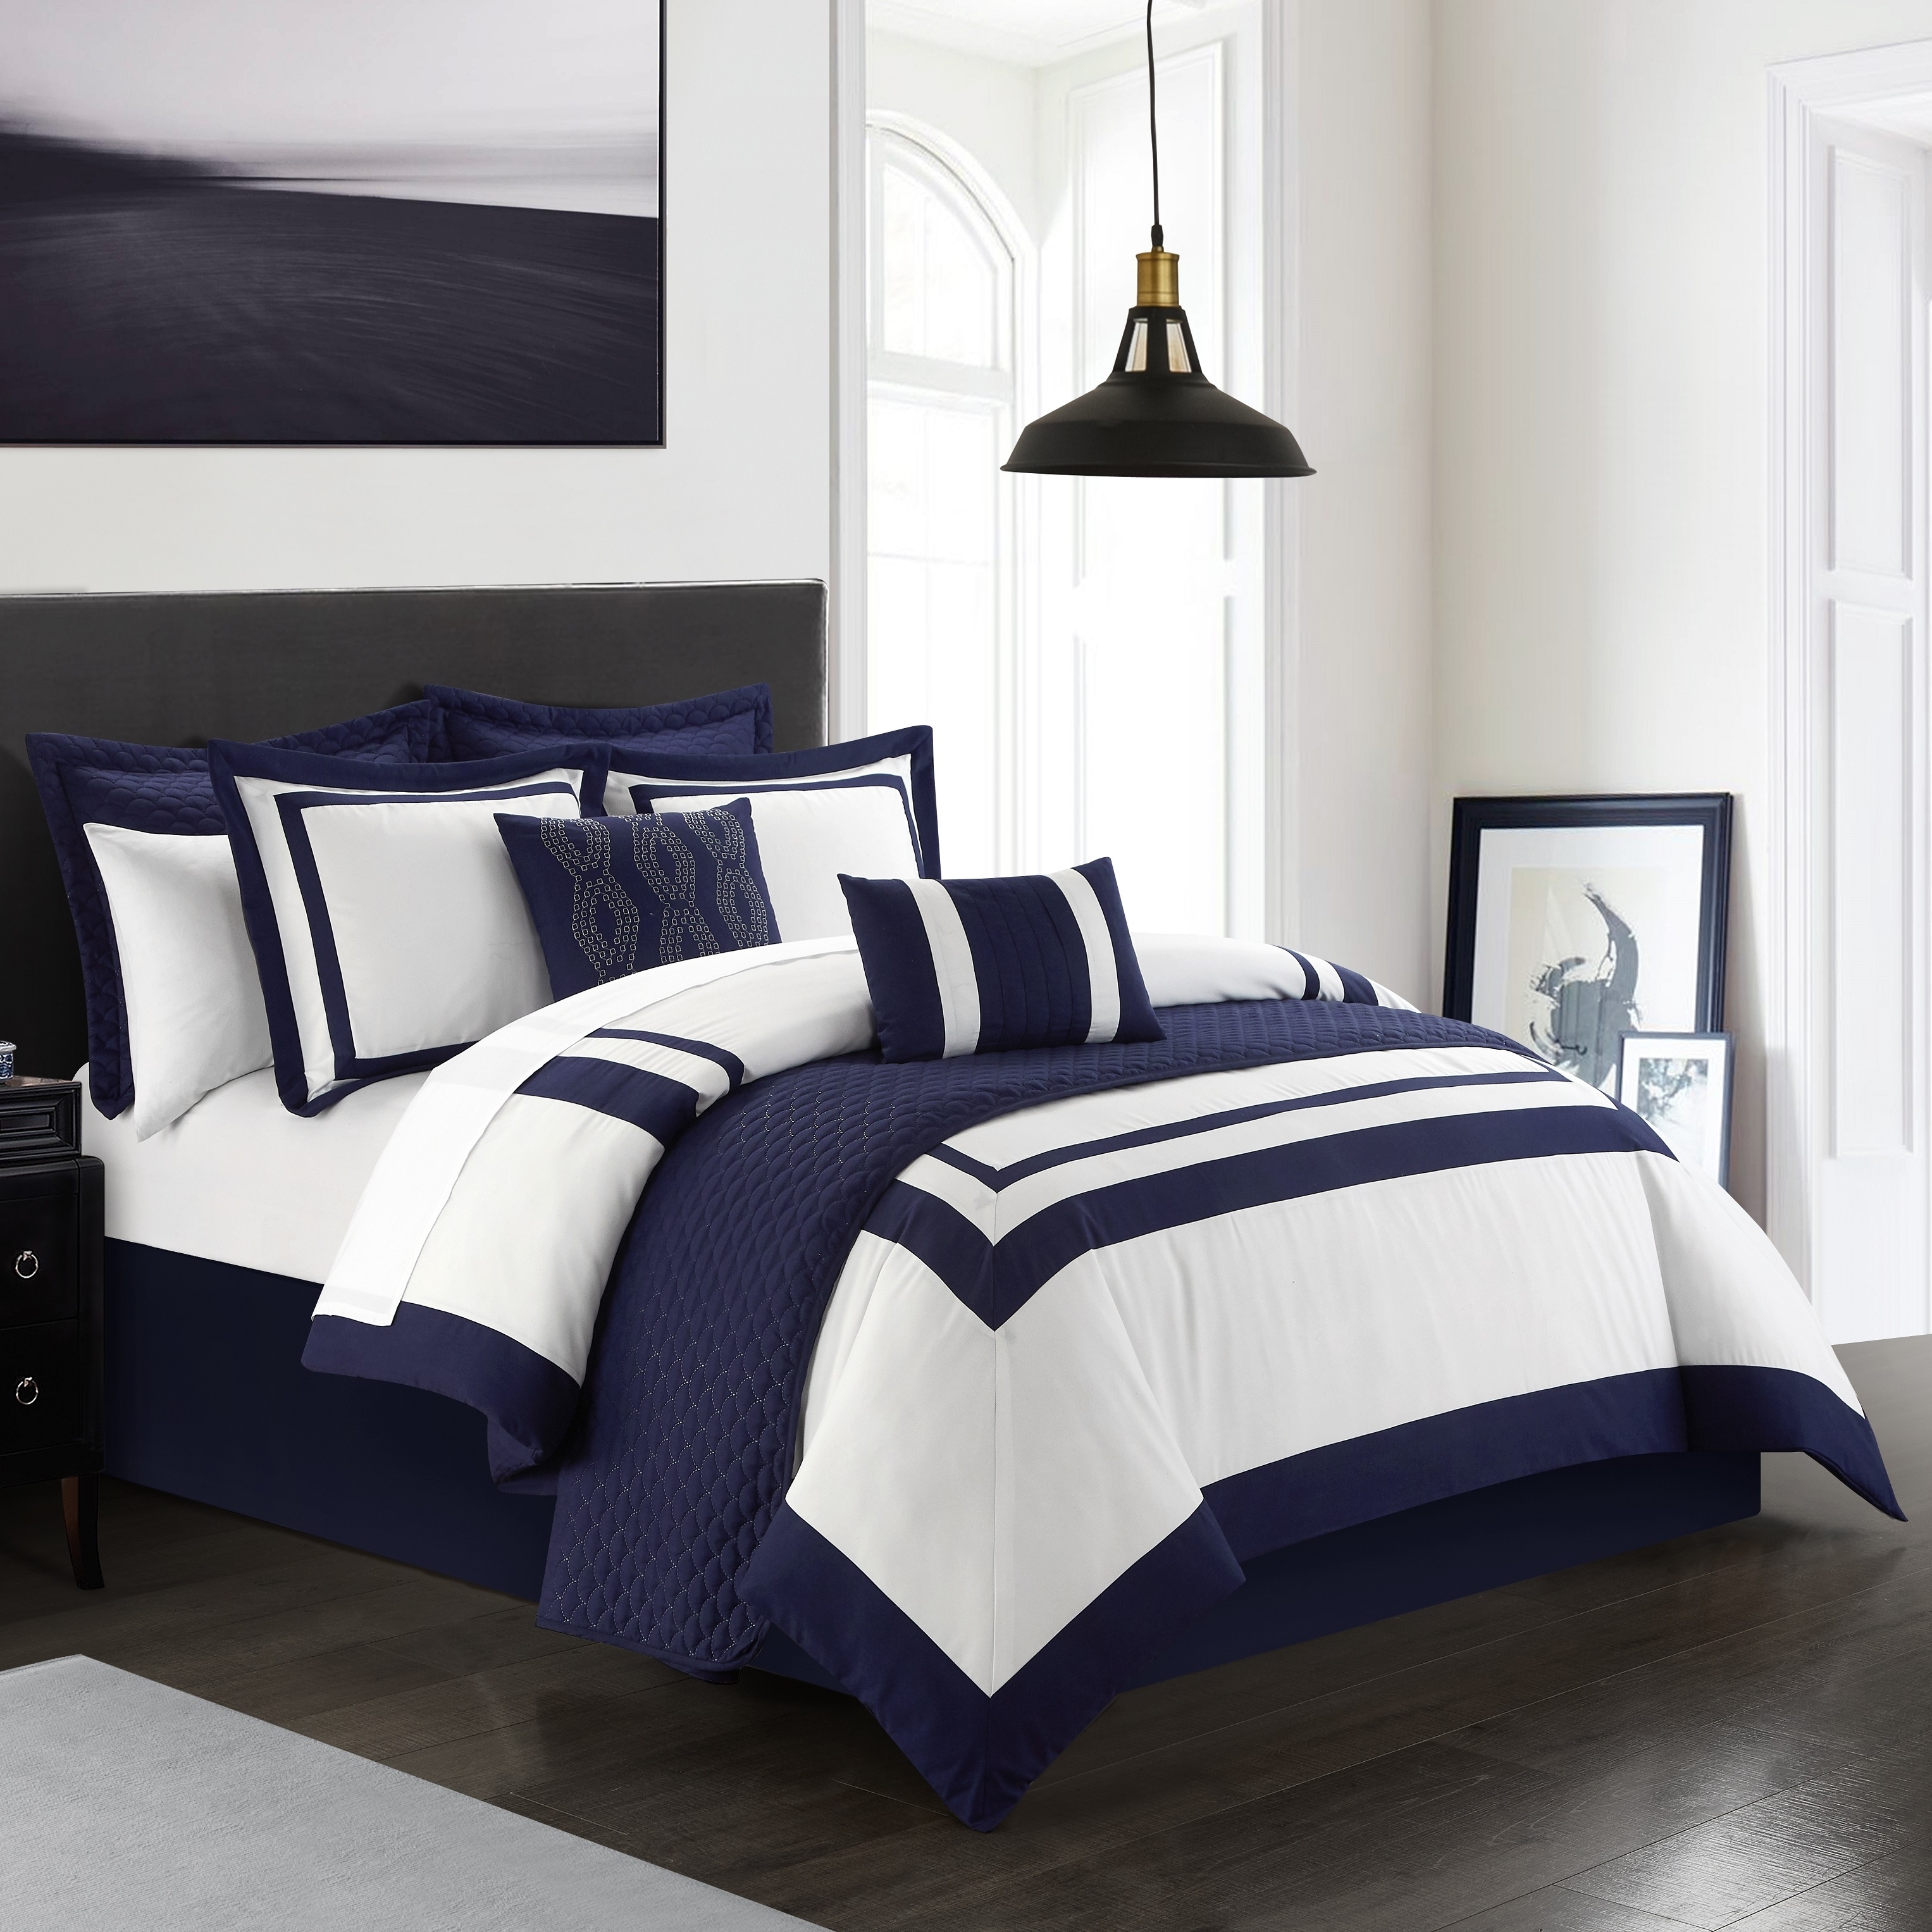 Hortense 8 Or 6 Piece Comforter And Quilt Set Hotel Collection - Navy, Twin - 6 Piece